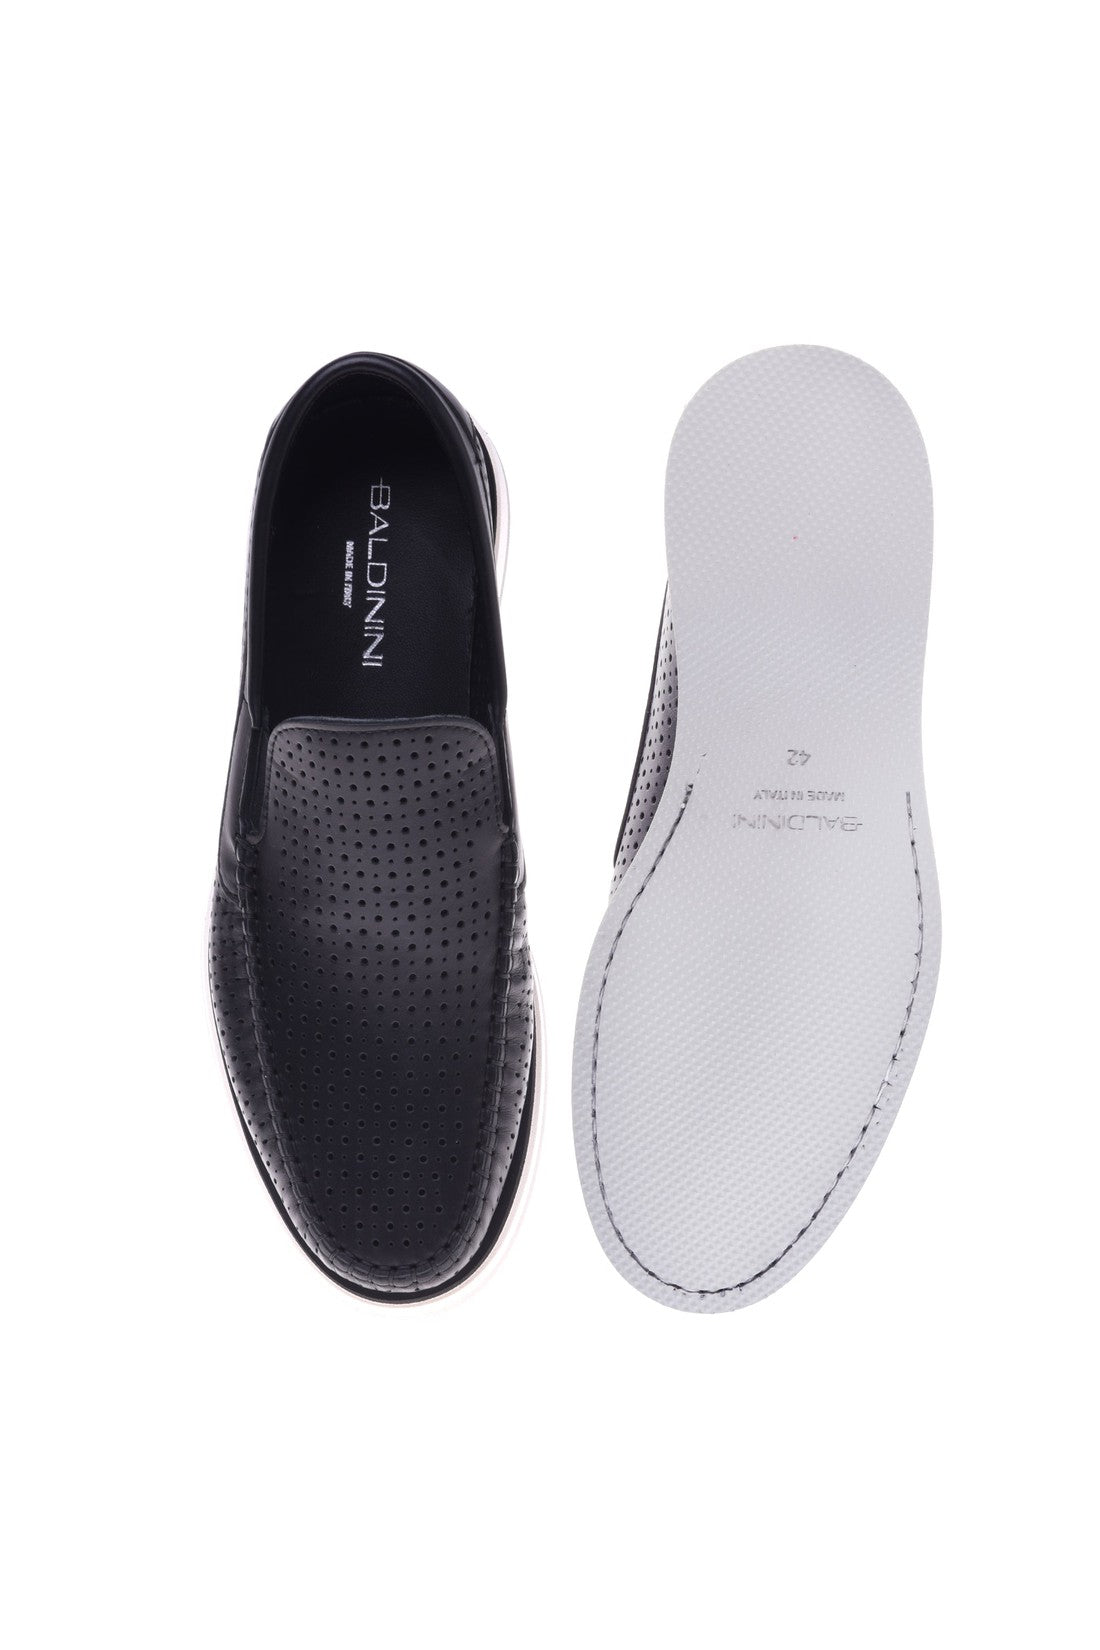 Loafer in black perforated calfskin